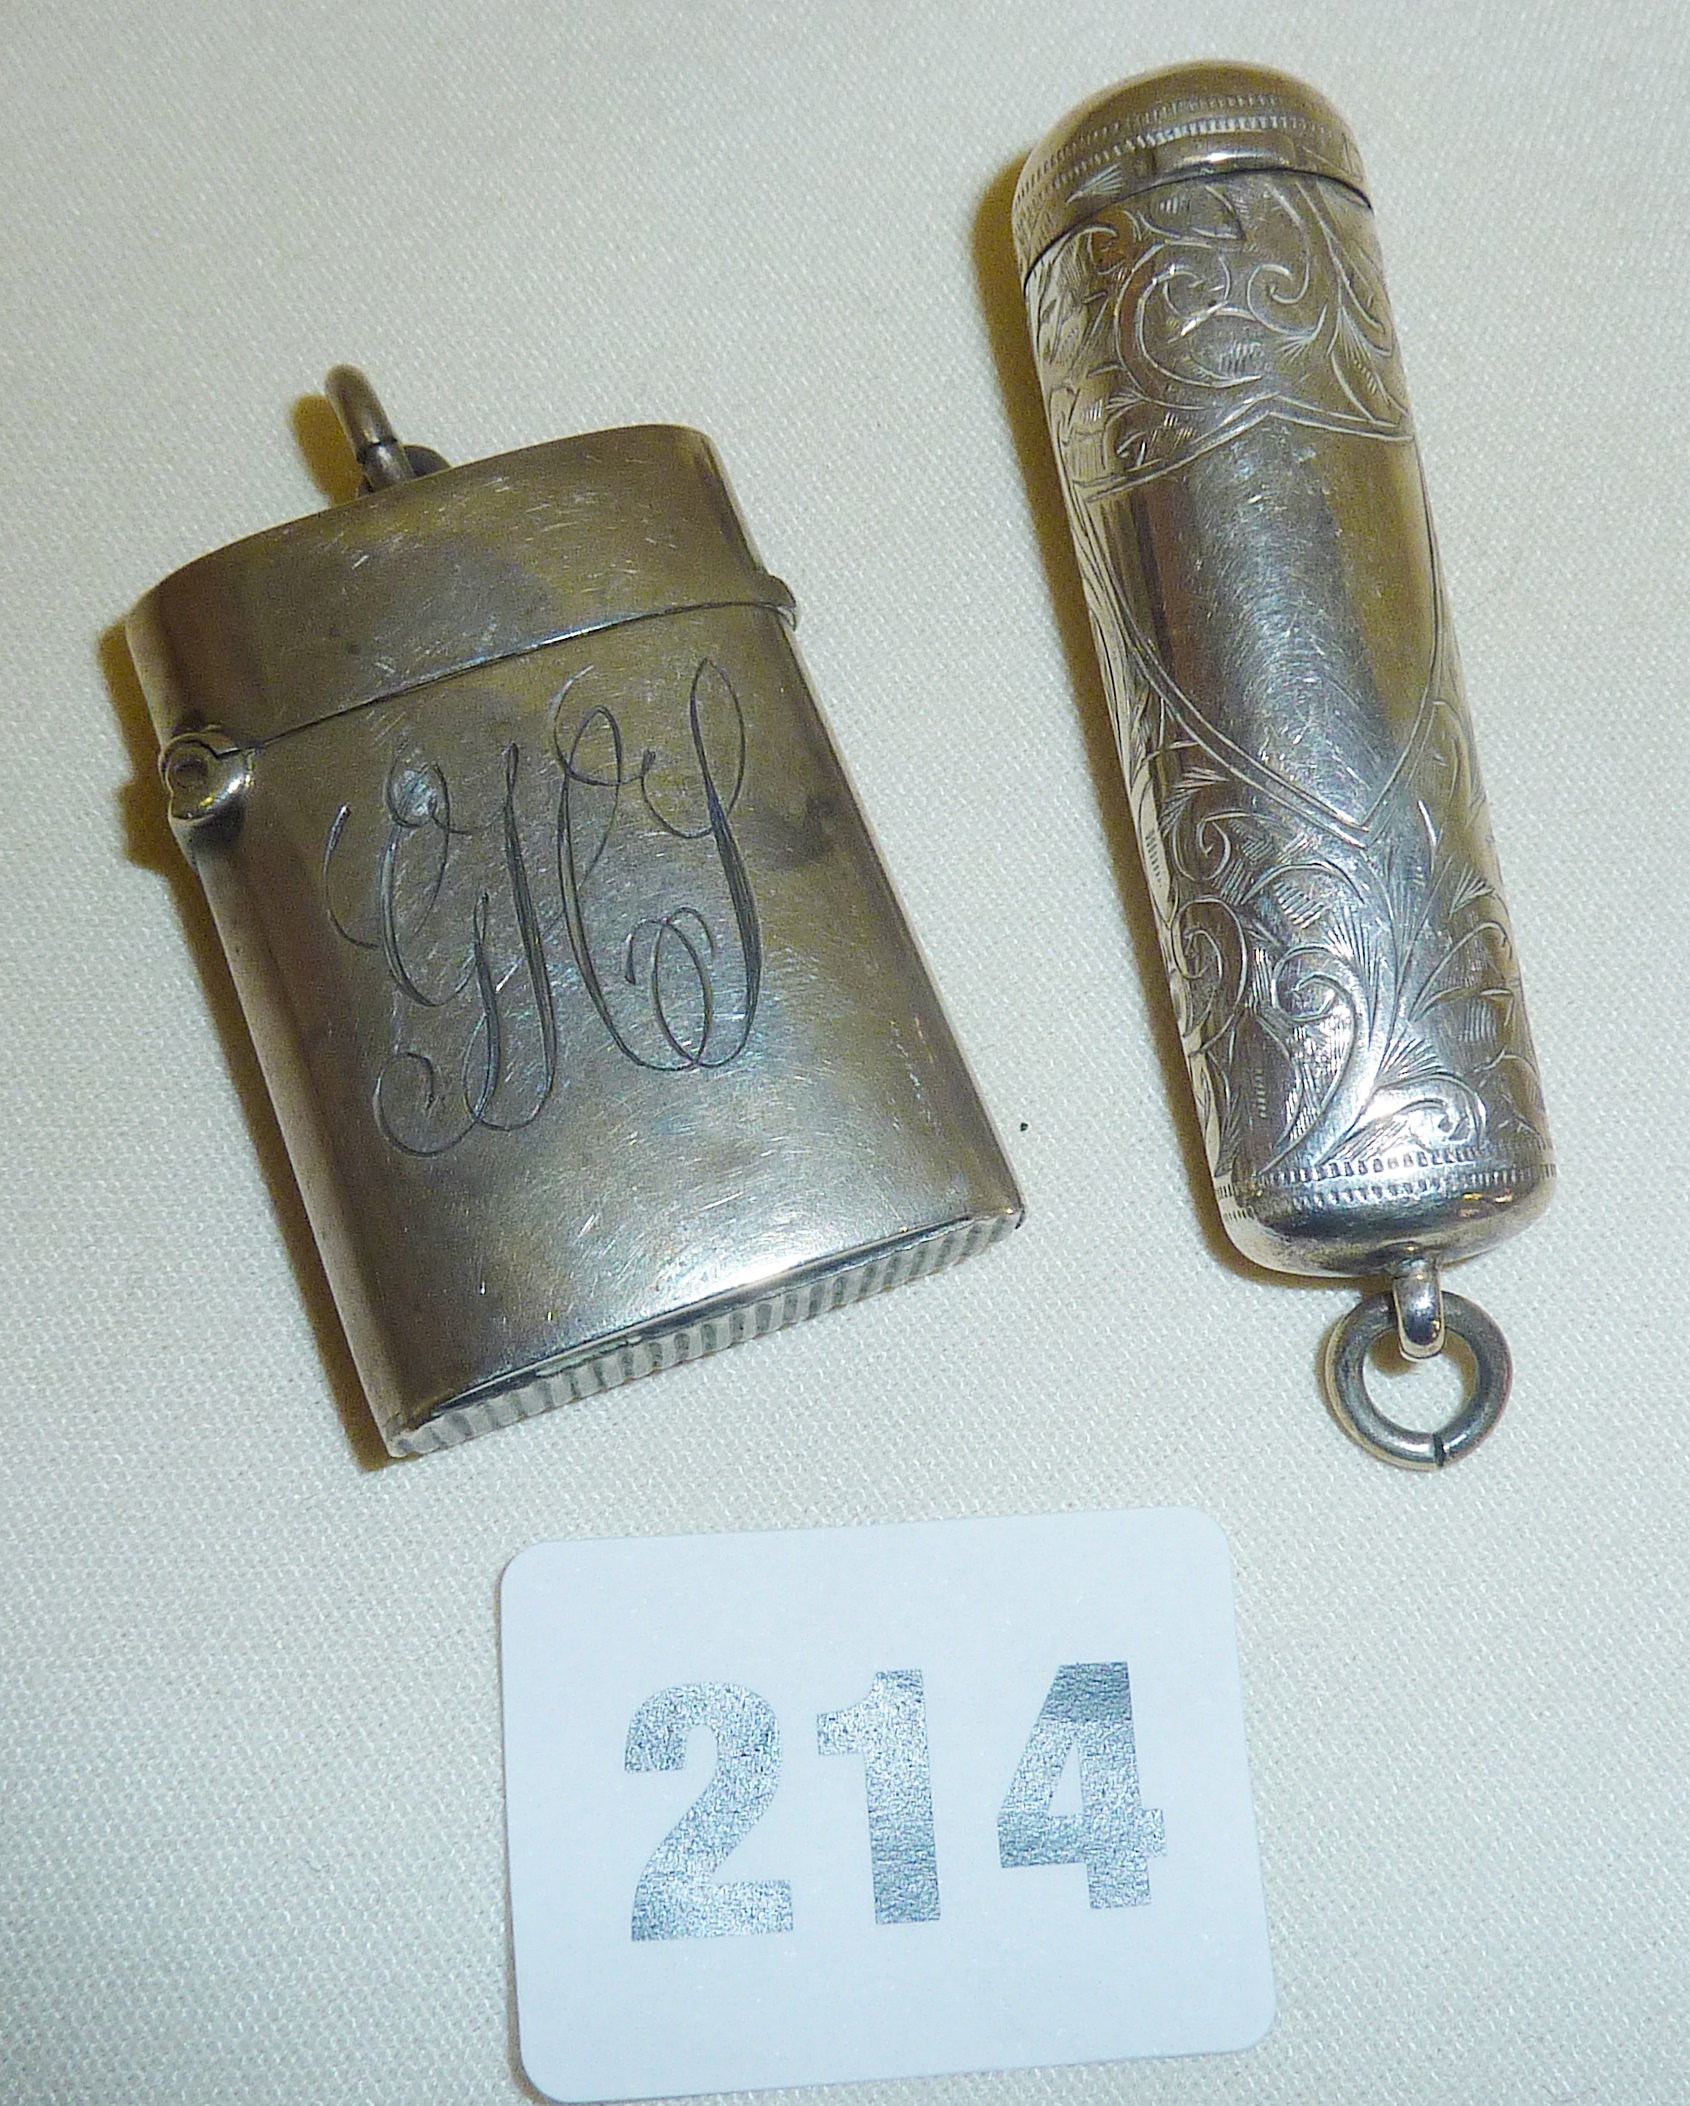 Hallmarked silver fob vesta (Birmingham 1900 by Boots Pure Drug Company), and a silver fob cigar